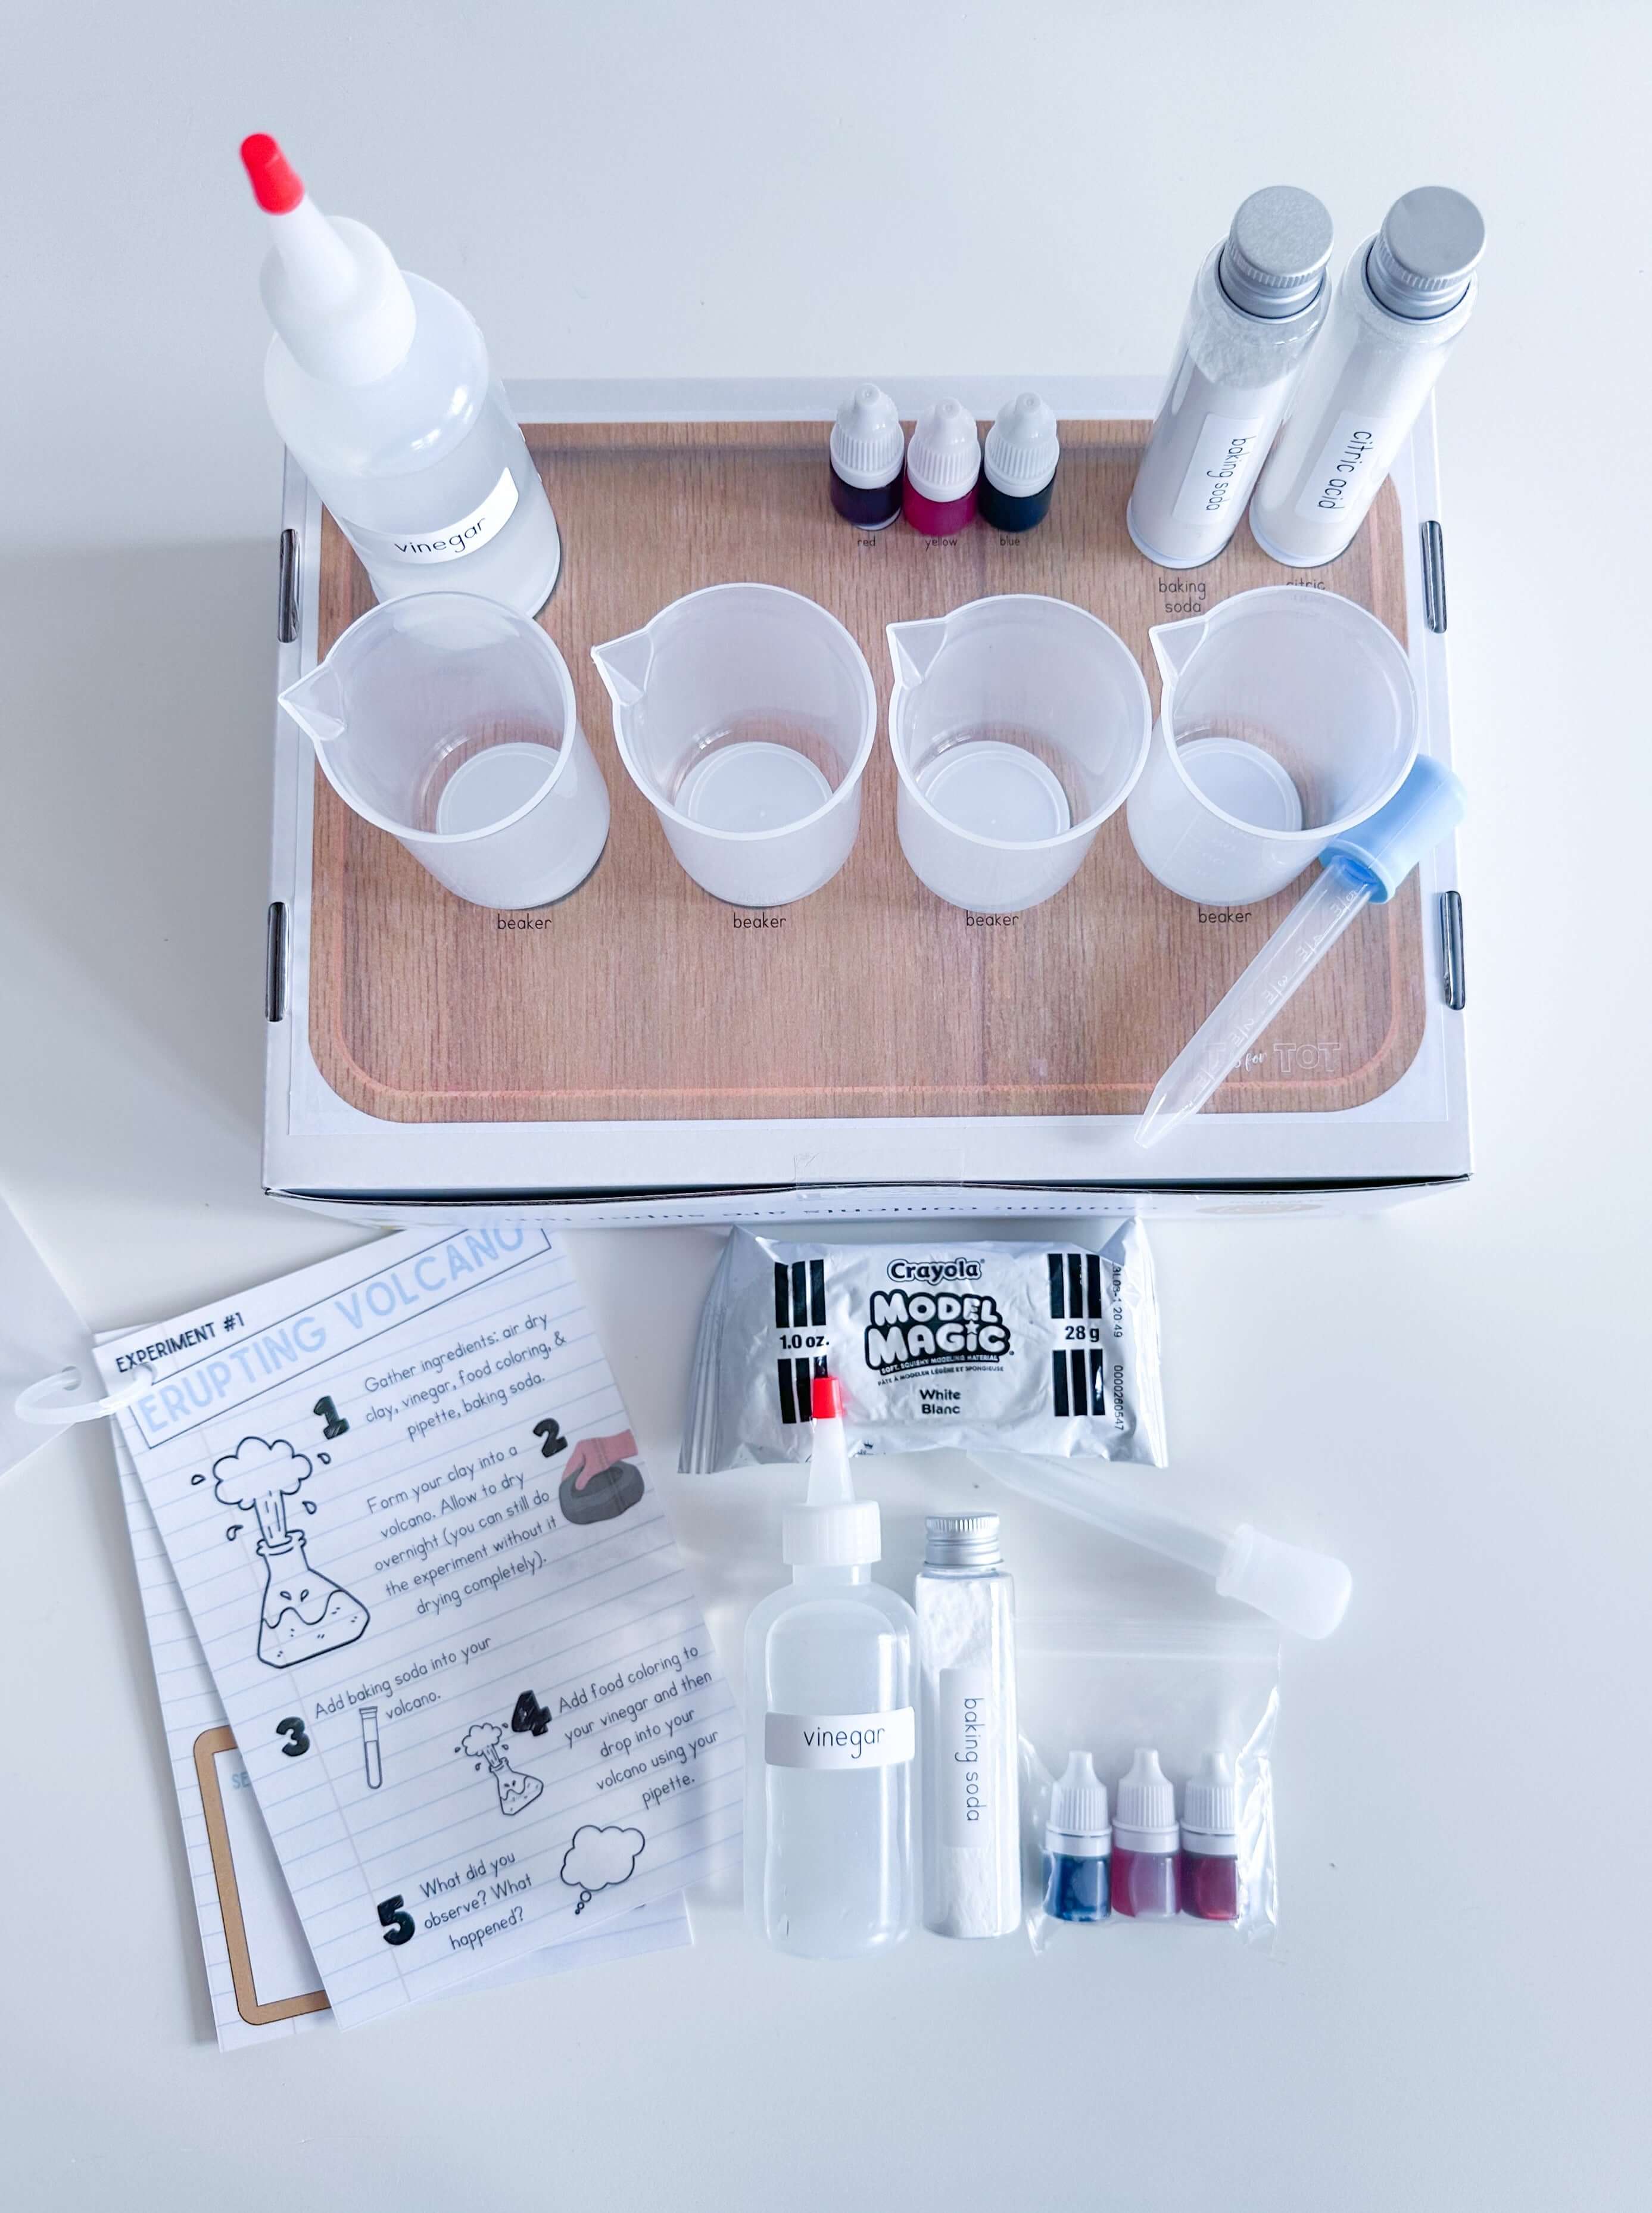 Science-themed play and learn kit for kids with a lab coat, beakers, pipettes, and food coloring. Includes an experiment guide, dry erase marker, art supplies, and homemade playdough with a lab playdough cutter. Ideal for science experiments and creative play.